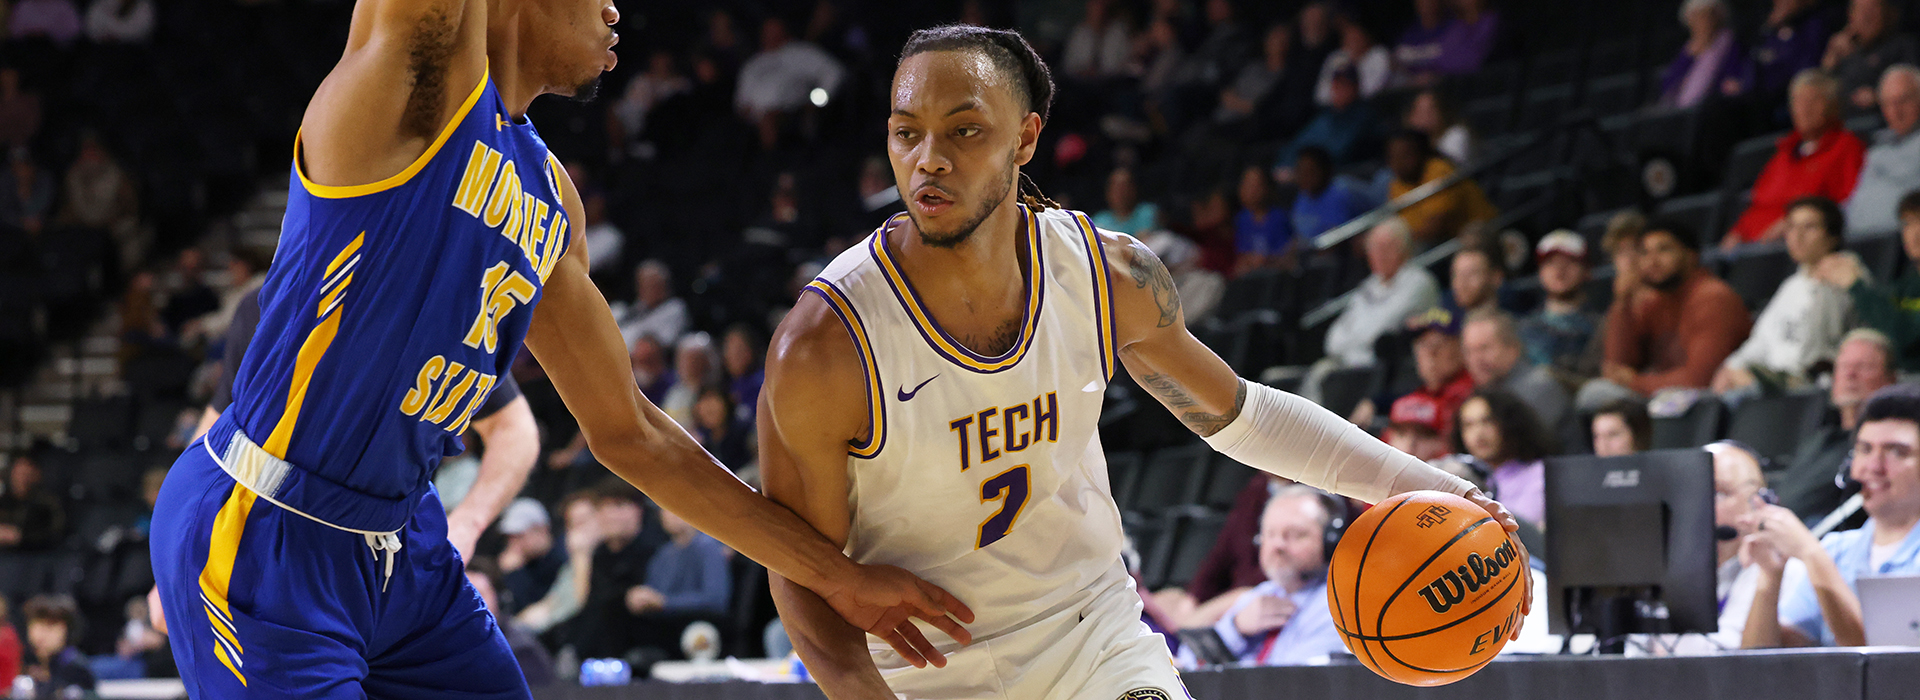 Dominant second half lifts Tech past Morehead State for third straight win